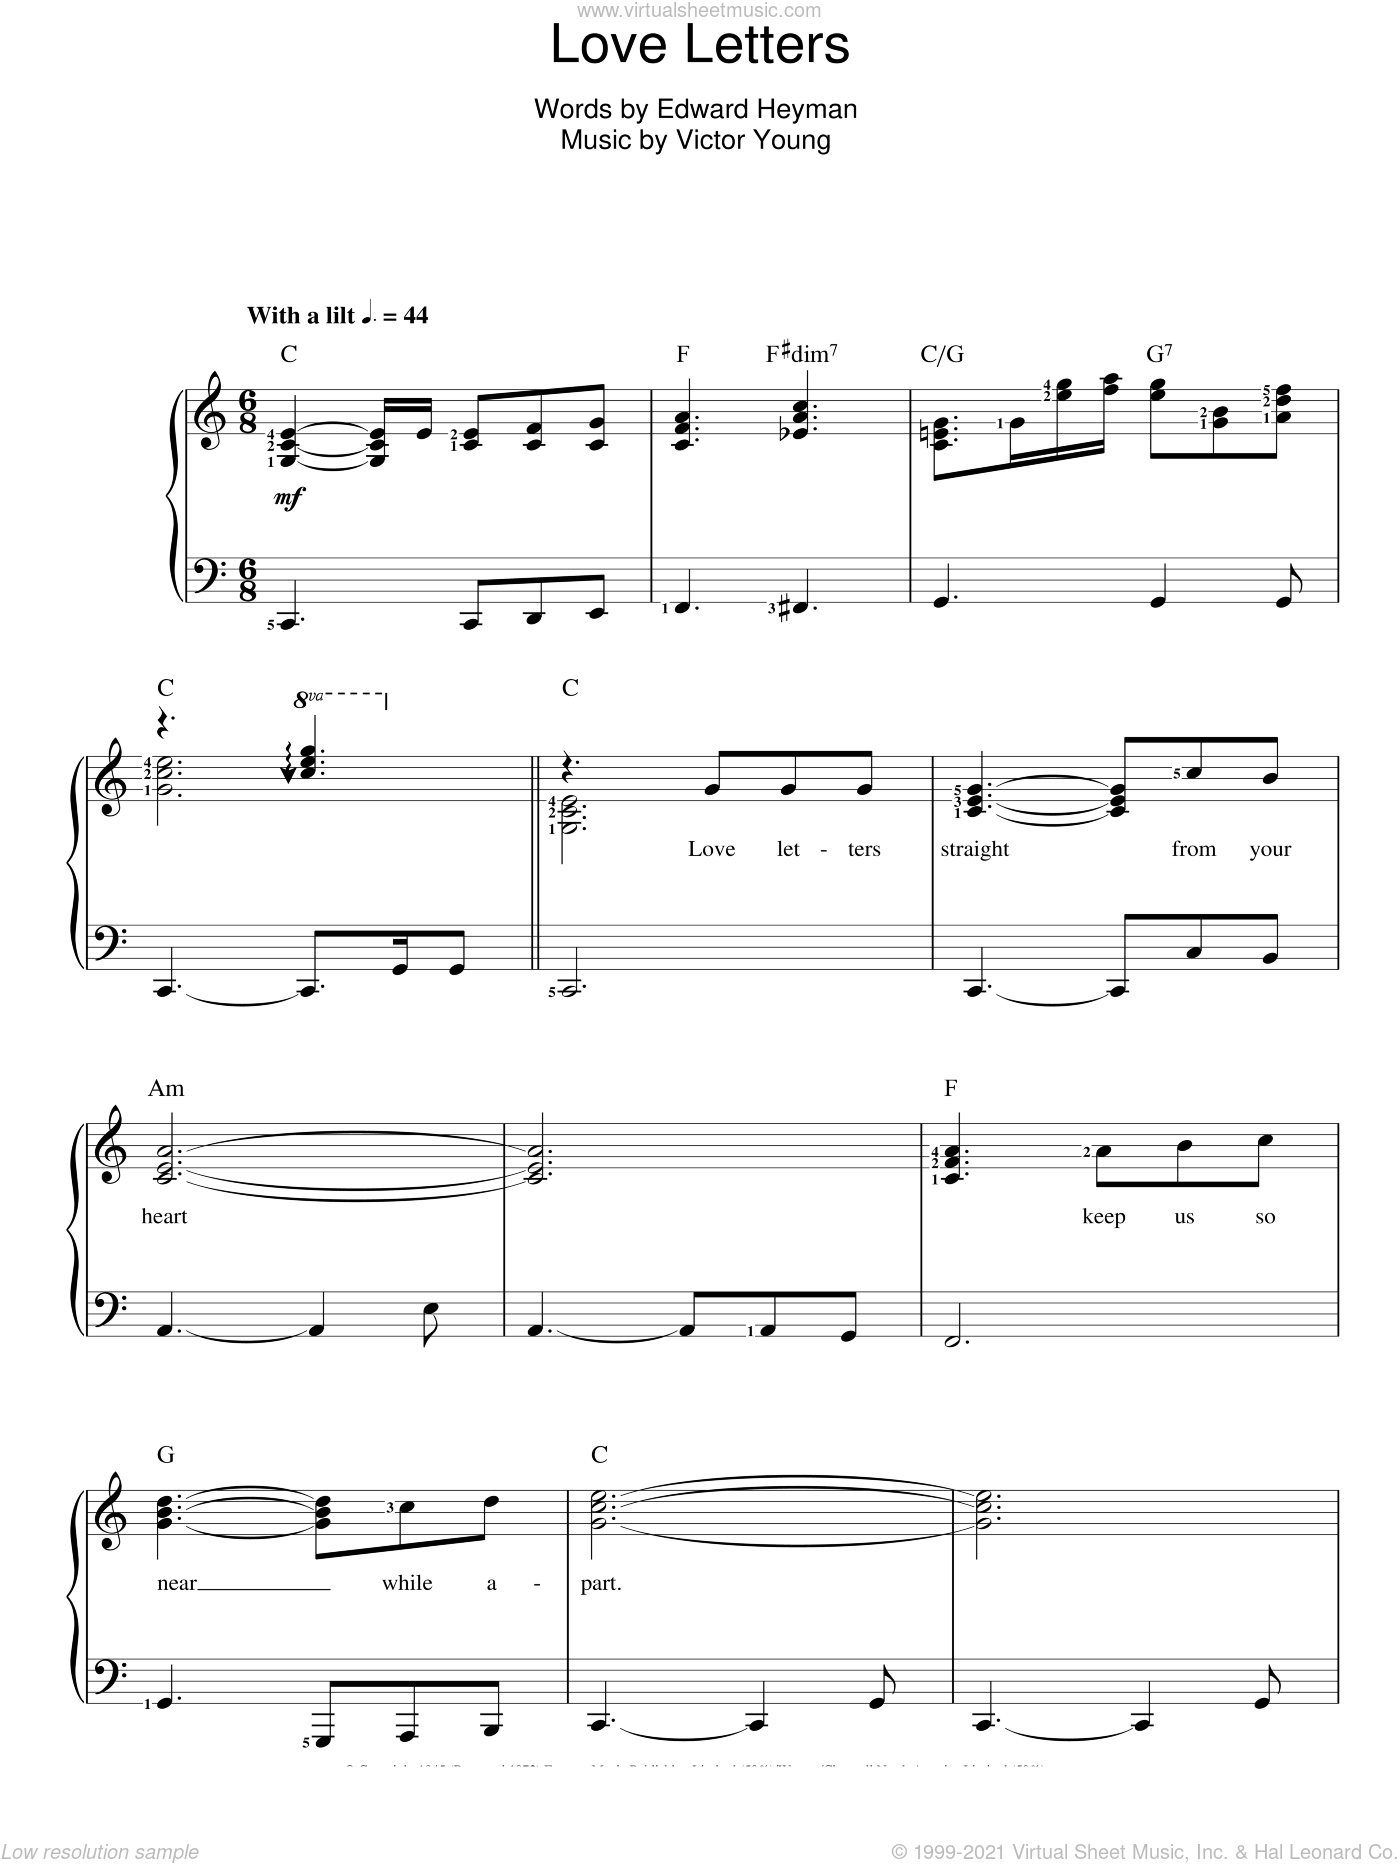 Lester Love Letters sheet music for voice and piano [PDF]